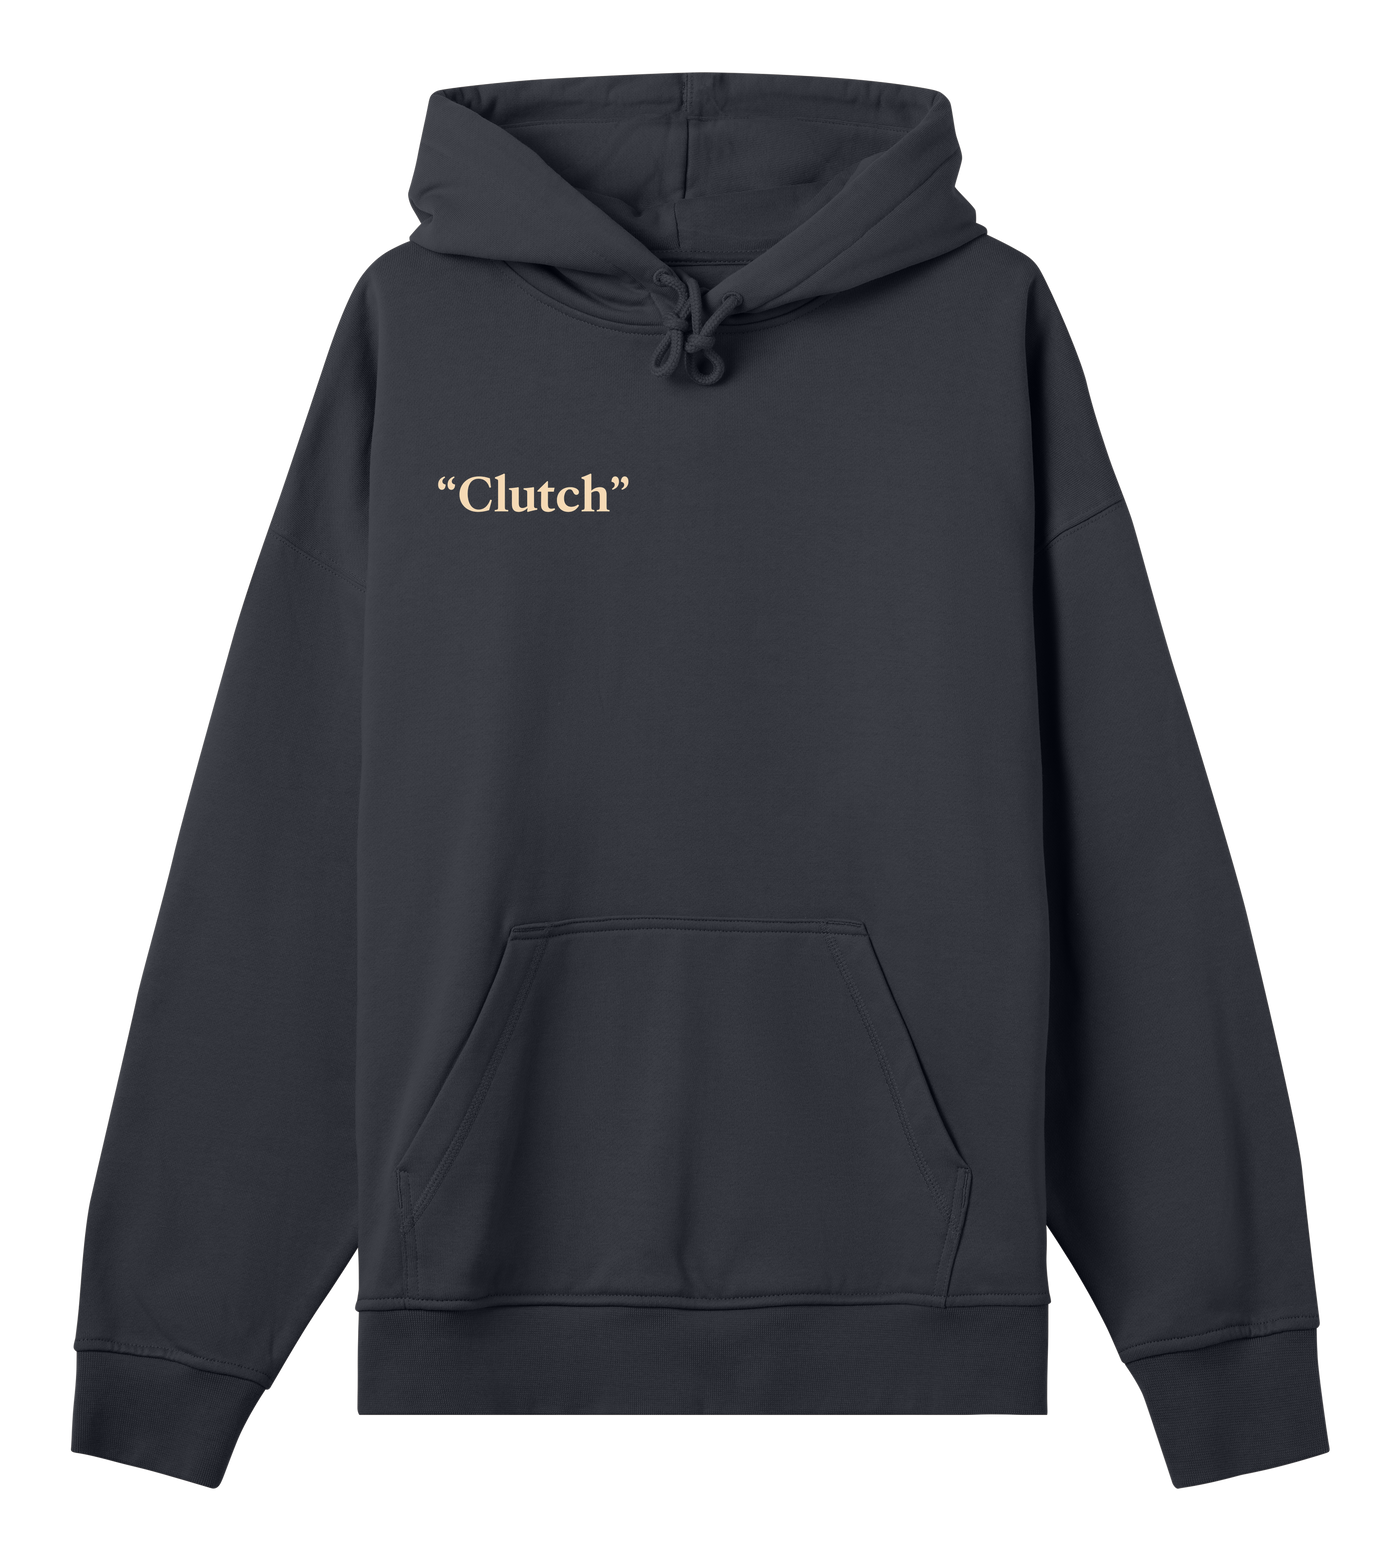 We Are Gamers - Clutch Hoodie